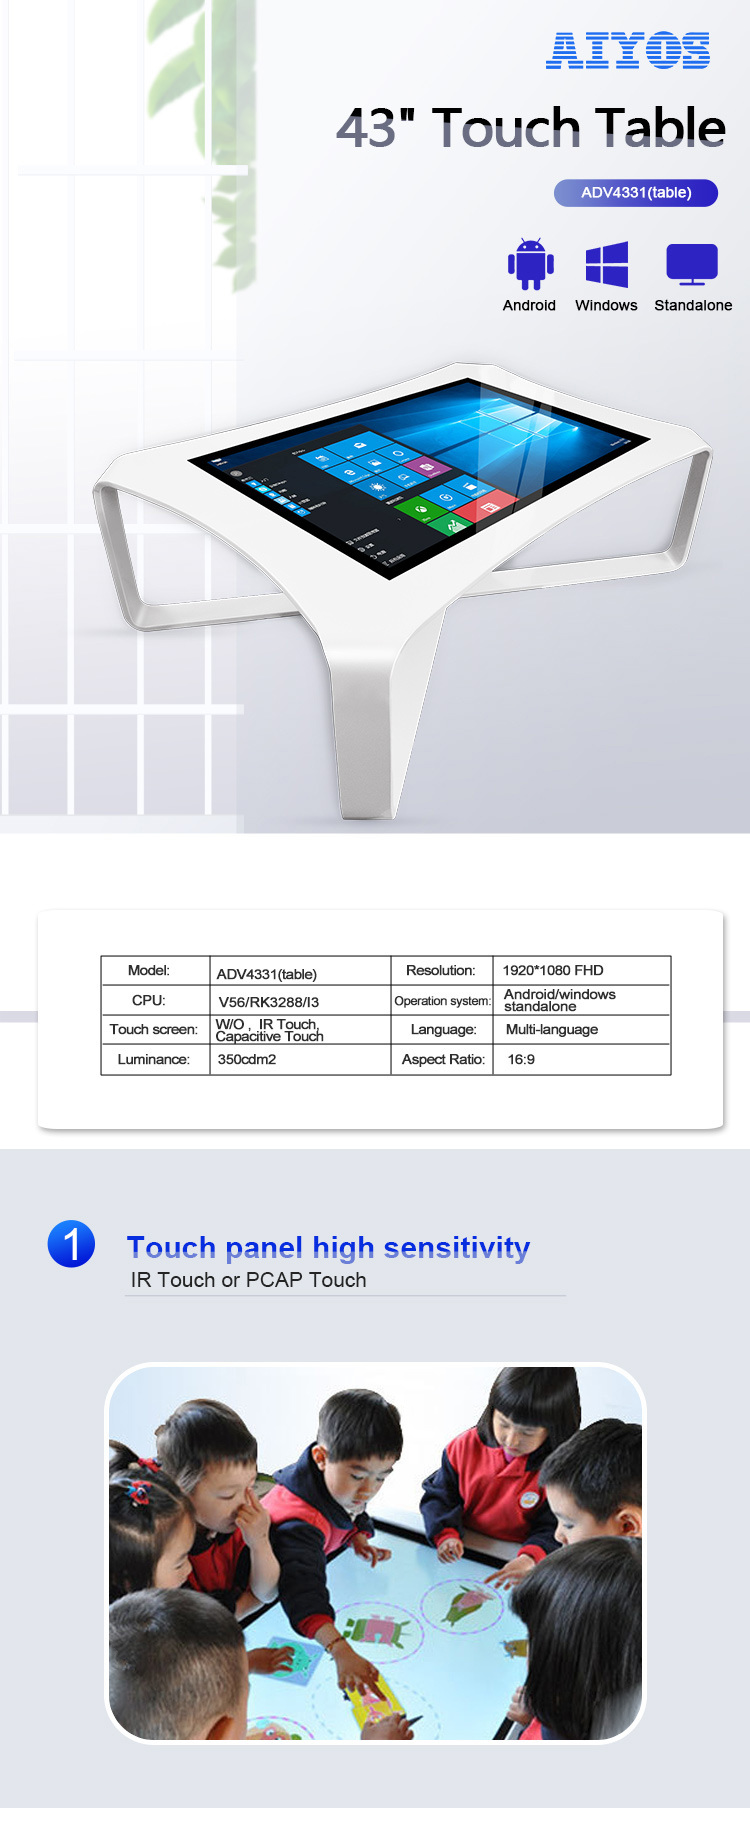 43 Inch Touch Screen PC Touch Table Windows10 PC All in One Interactive Table WiFi Digital Podium